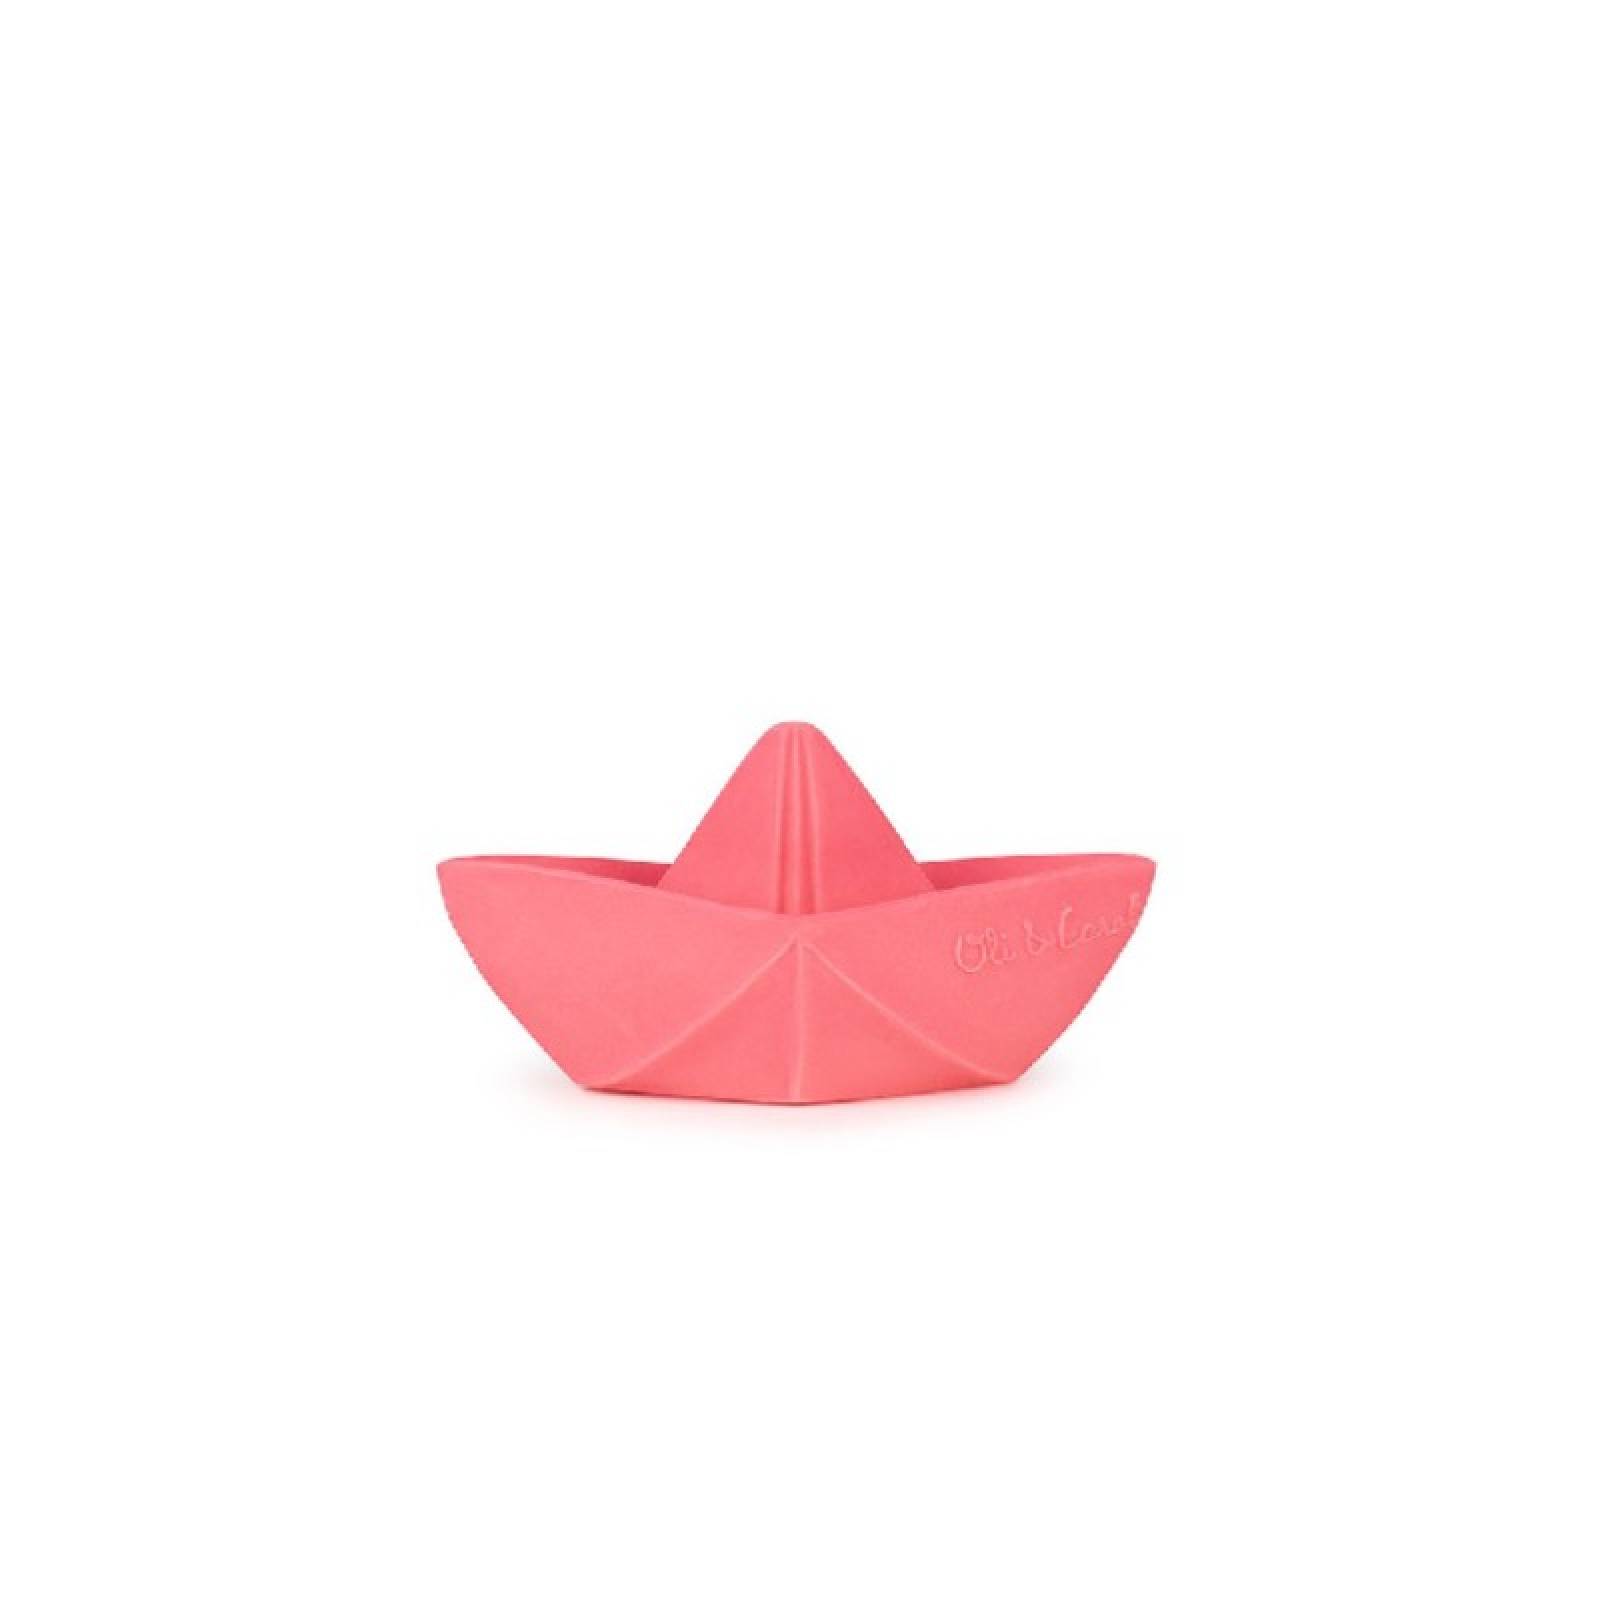 Origami Boat Natural Rubber Bath Toy In Pink 0+ thumbnails